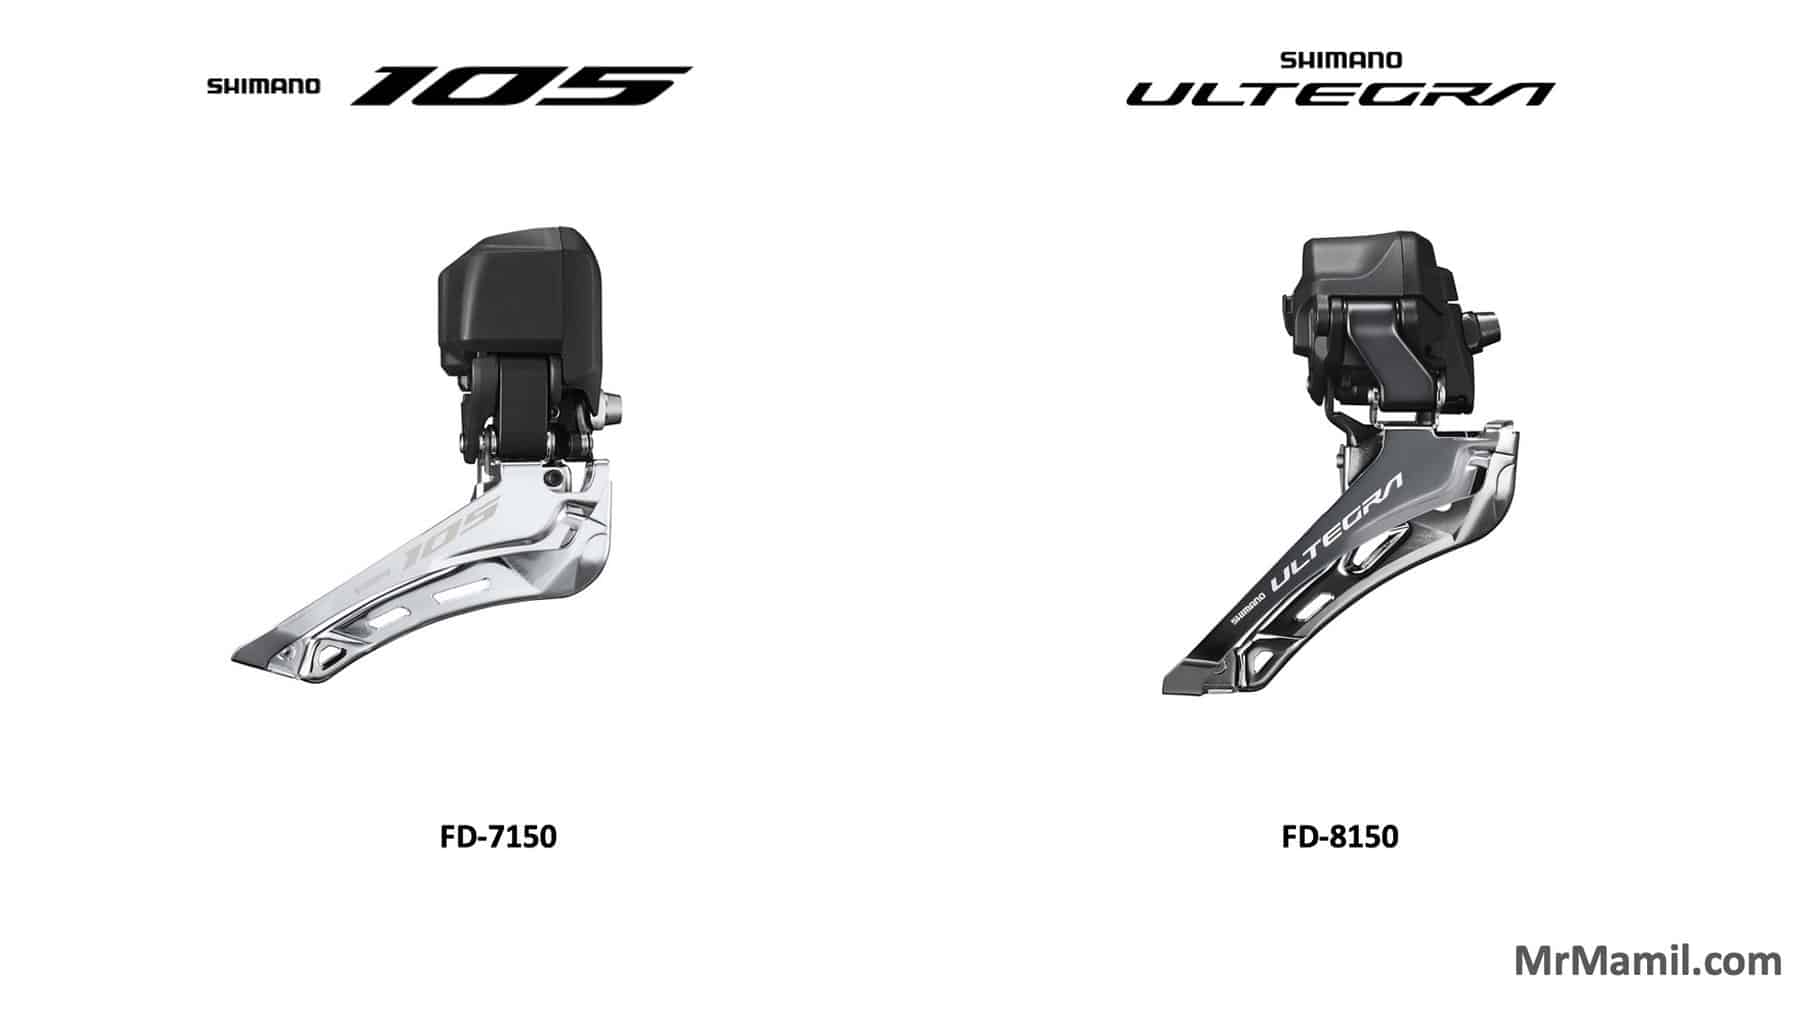 Side-by-side comparison of Shimano bicycle front derailleurs. On the left, a Shimano 105 Di2 RD labeled FD-7150. On the right, a Shimano Ultegra Di2 FD labeled RD-8150.